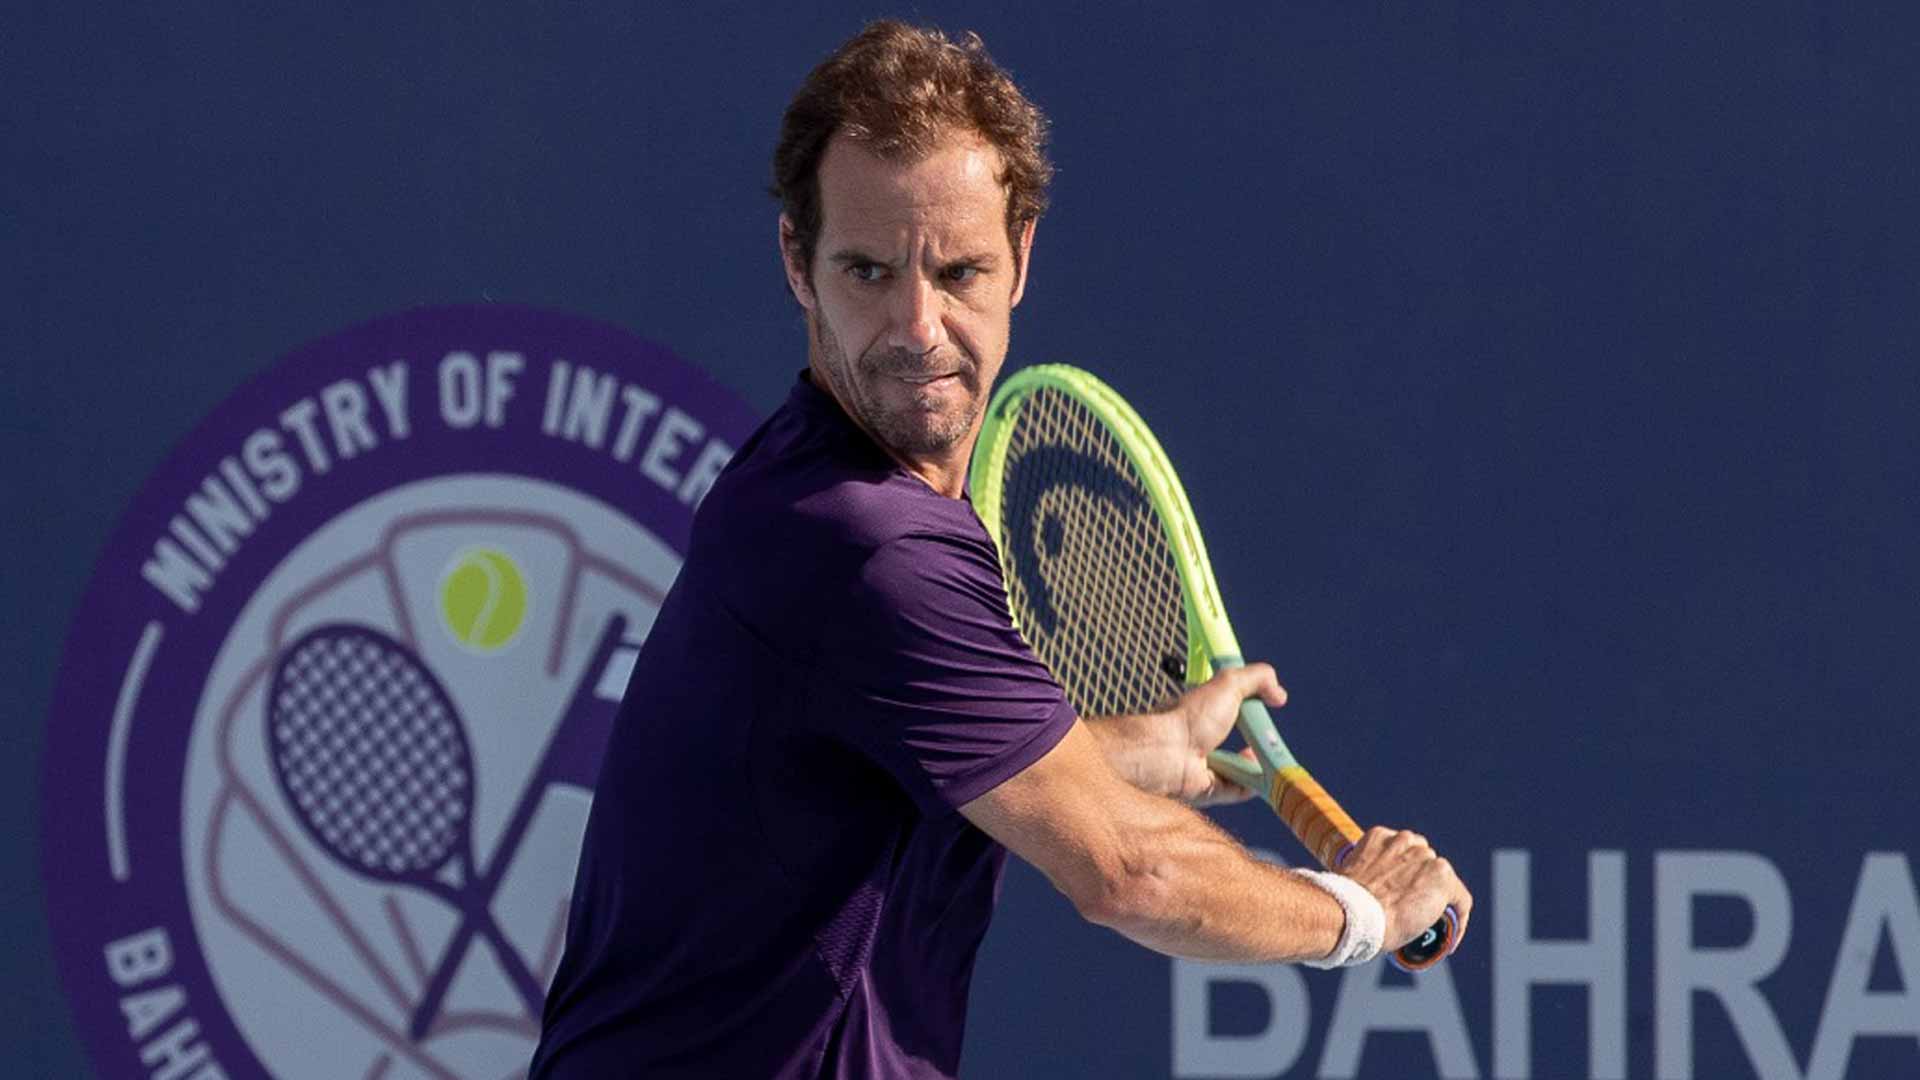 Richard Gasquet in action at the Manama Challenger.